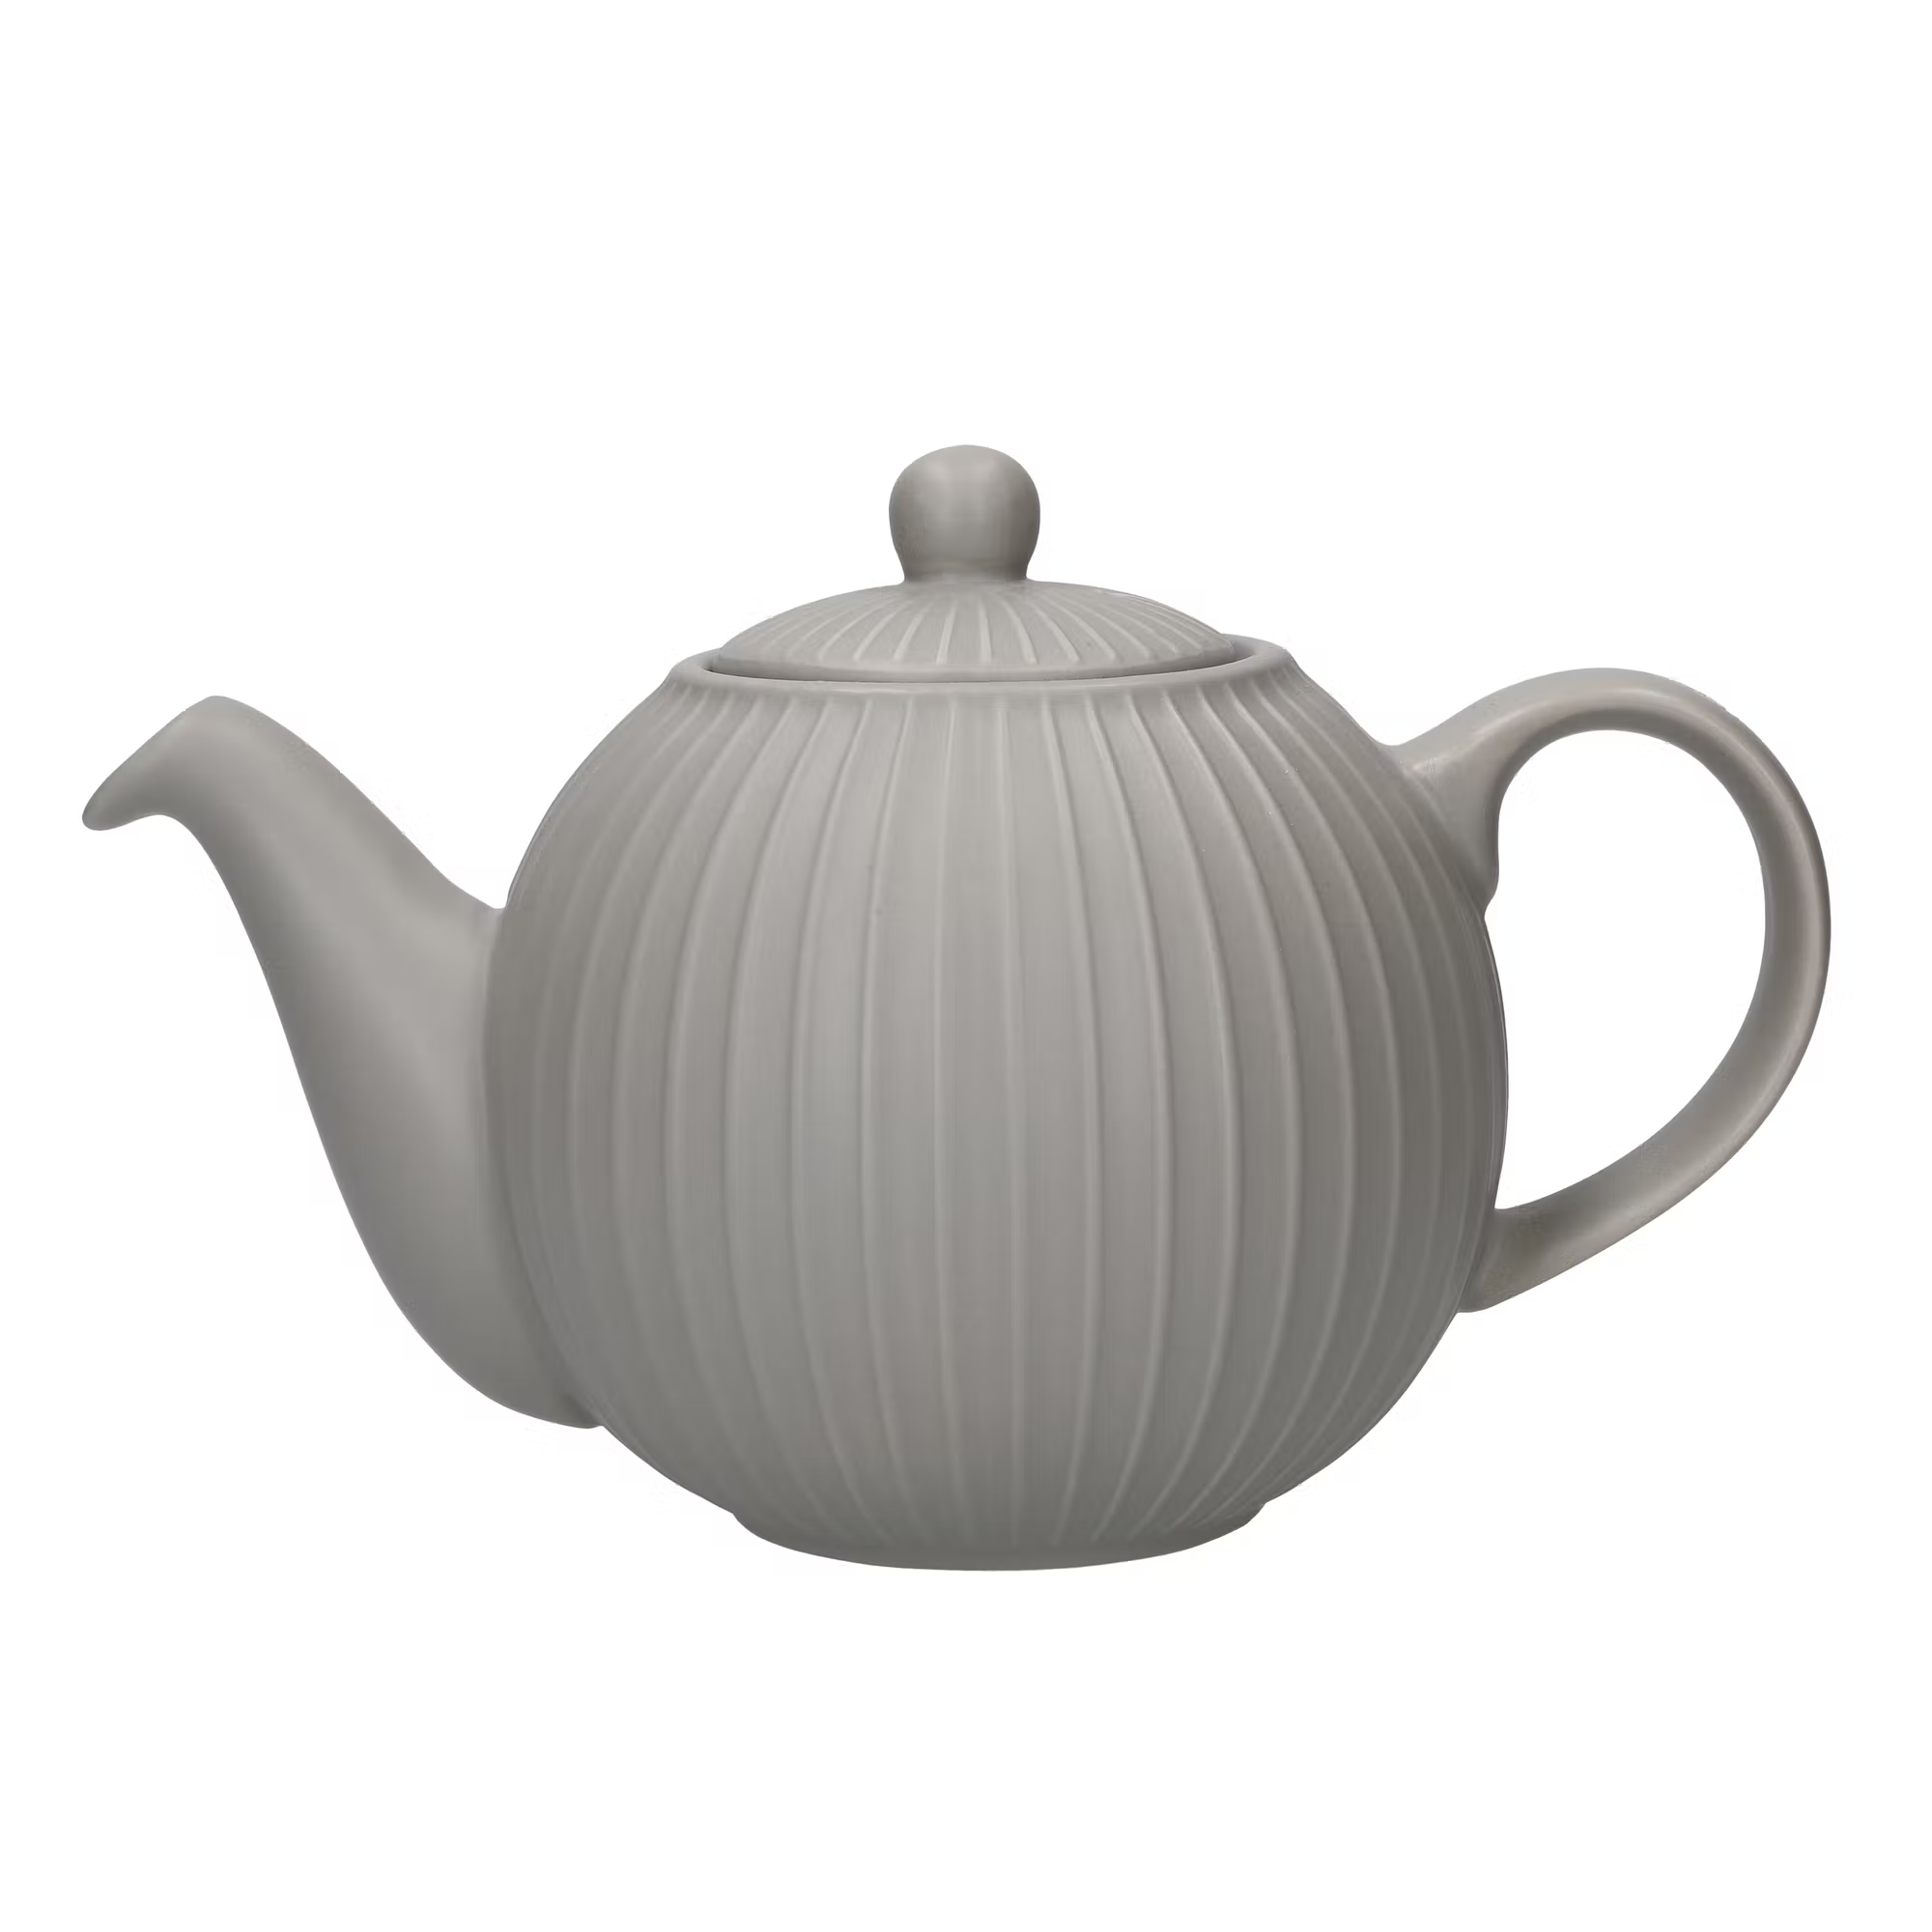 London Pottery Globe Textured Teapot 4-Cup, Grey - Kate's Cupboard